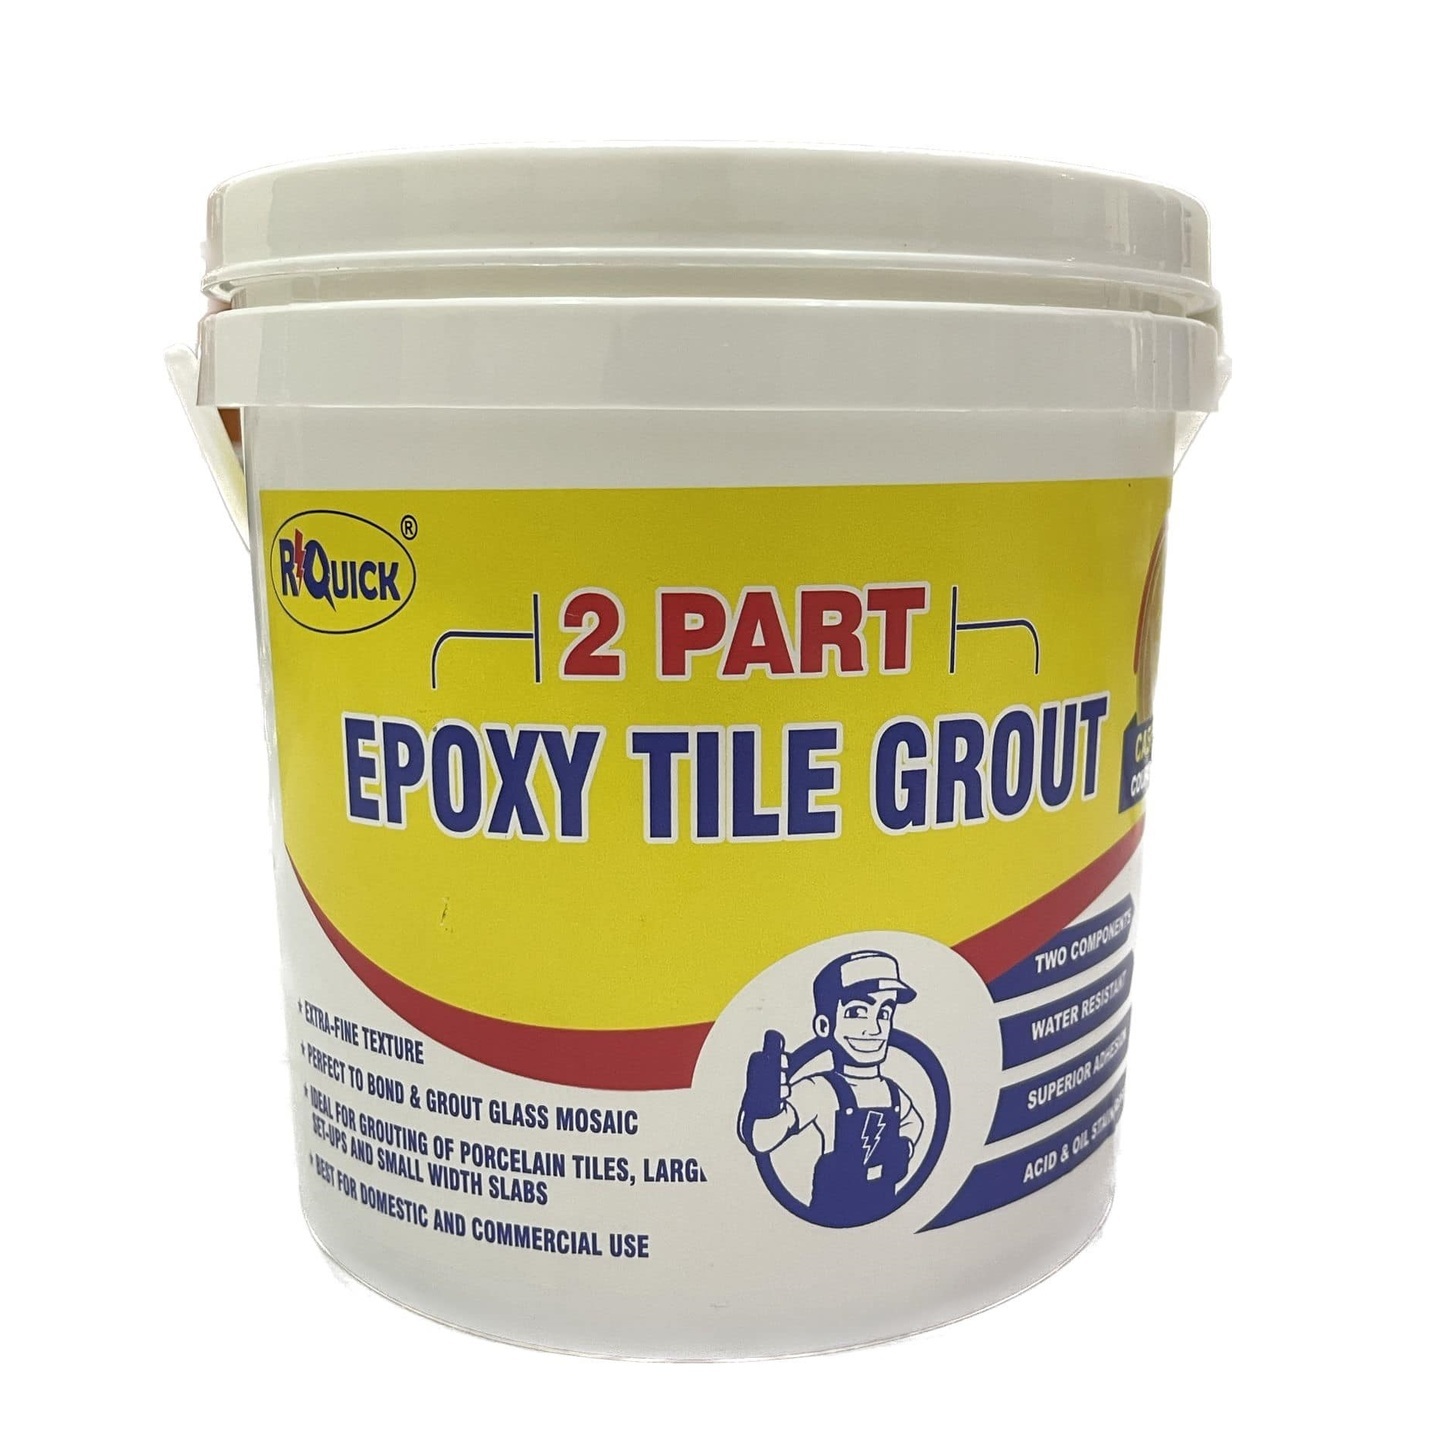 RQuick Two Part Epoxy Tile Grout 900 g